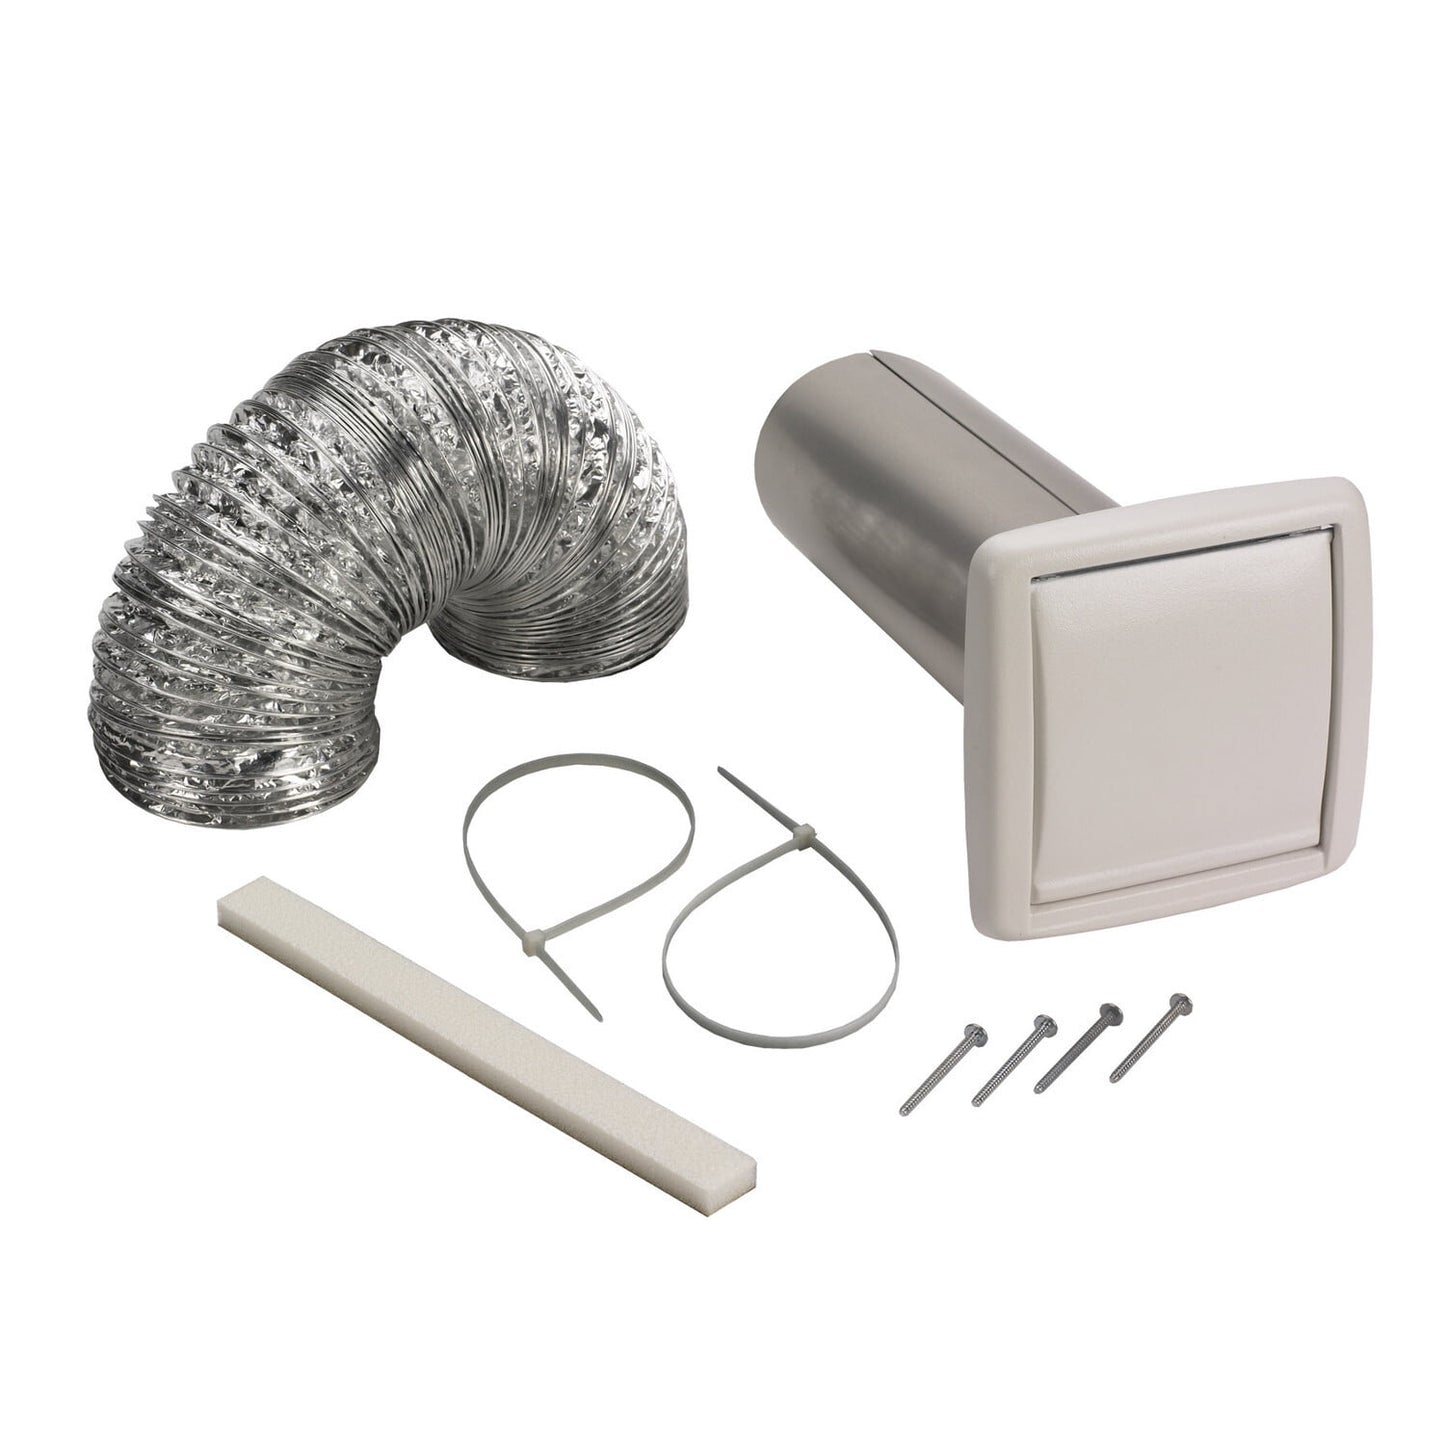 Broan WVK2A Broan-Nutone® Wall Vent Kit, 3" Or 4" Round Duct